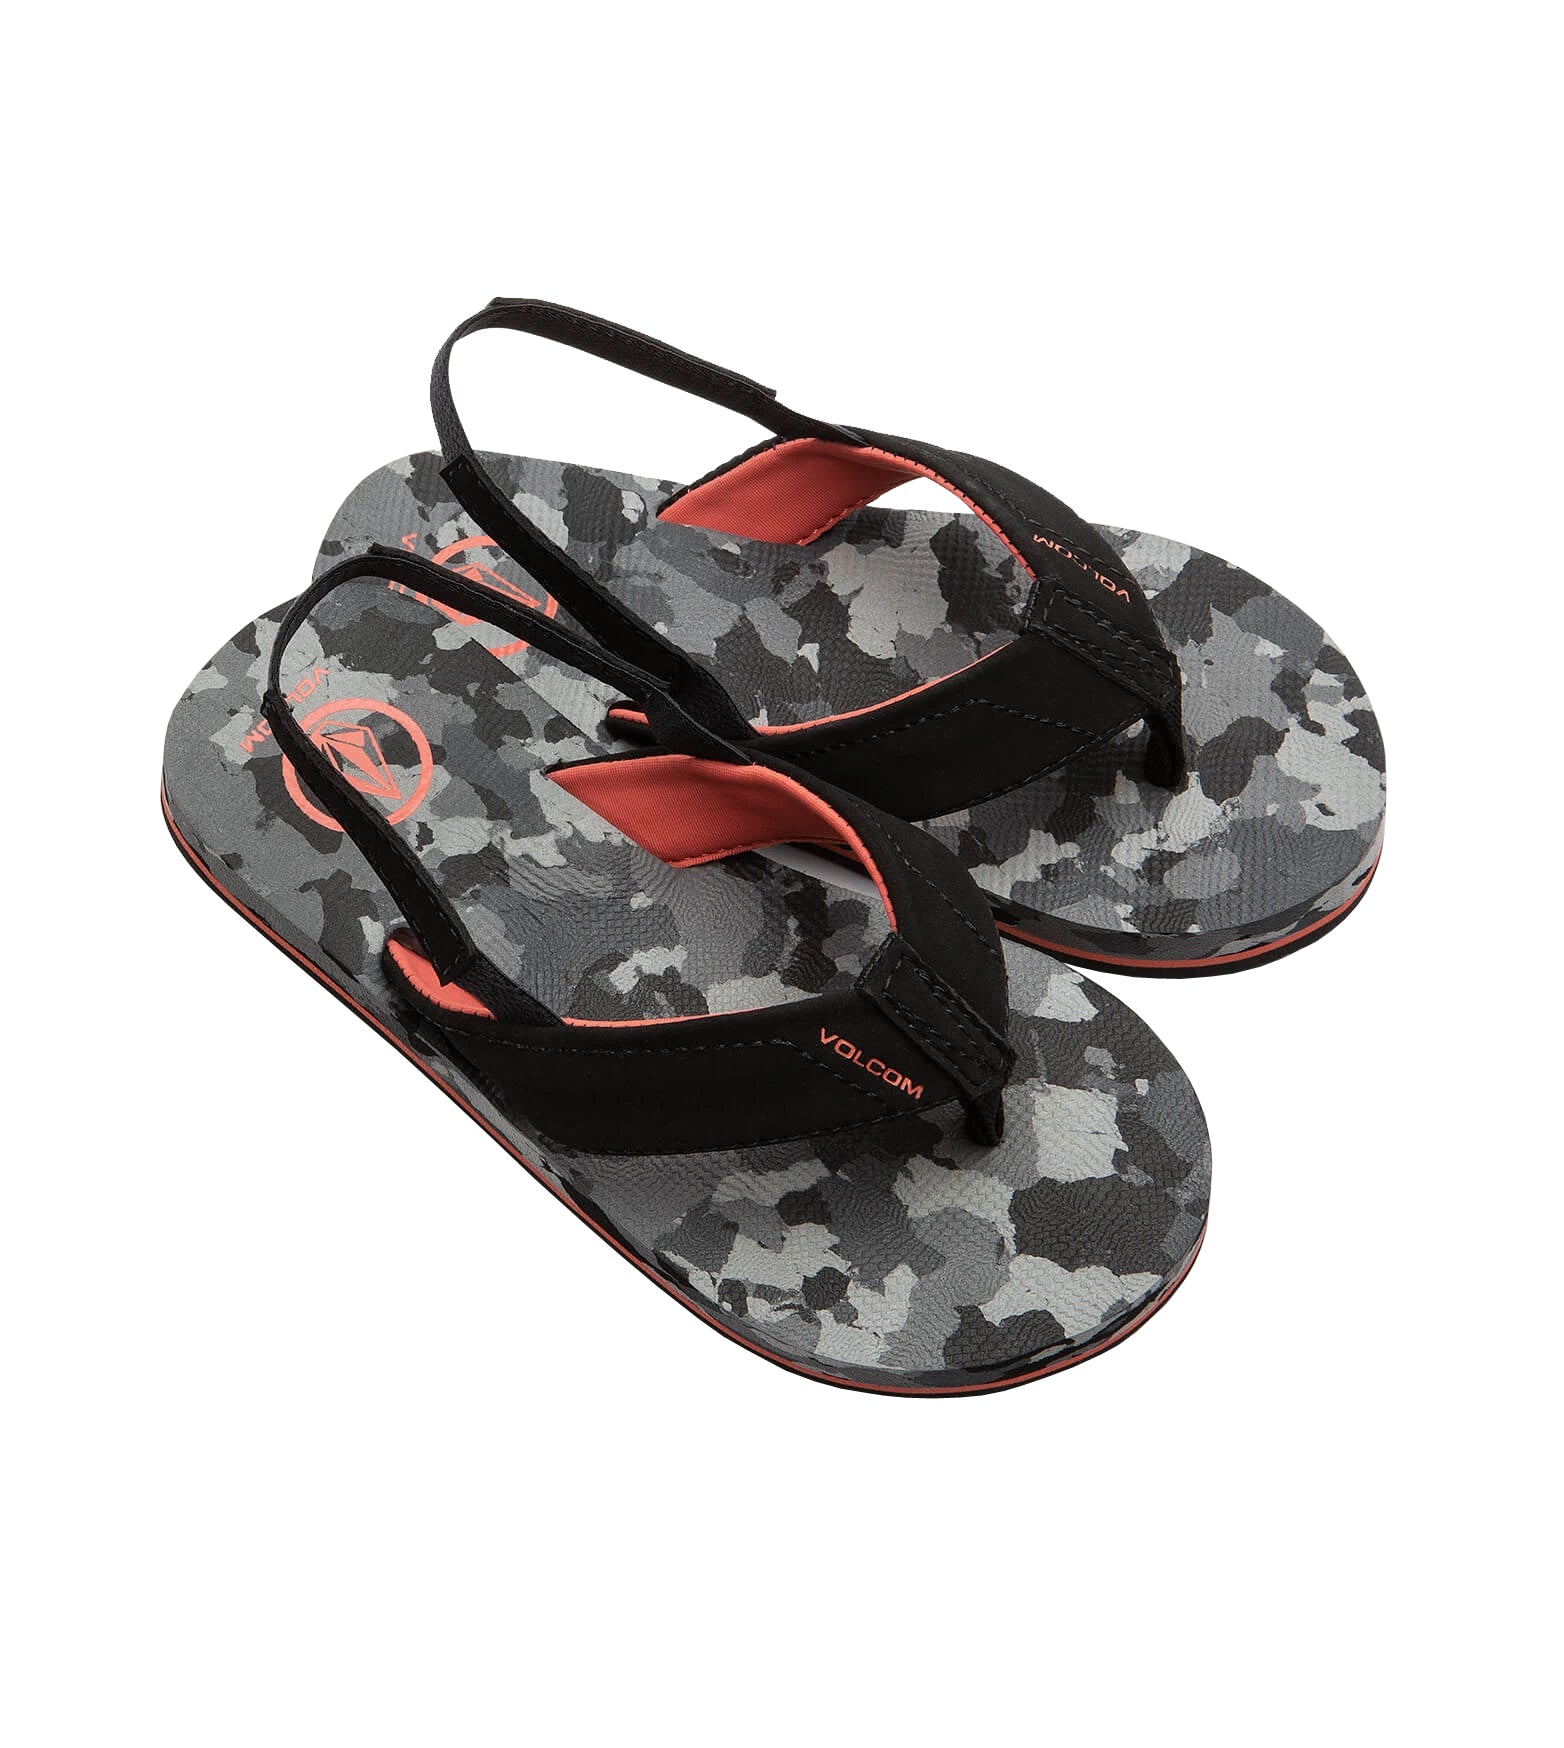 Volcom Victor Little Youth Boys Sandal CAM-Camouflage 8 C